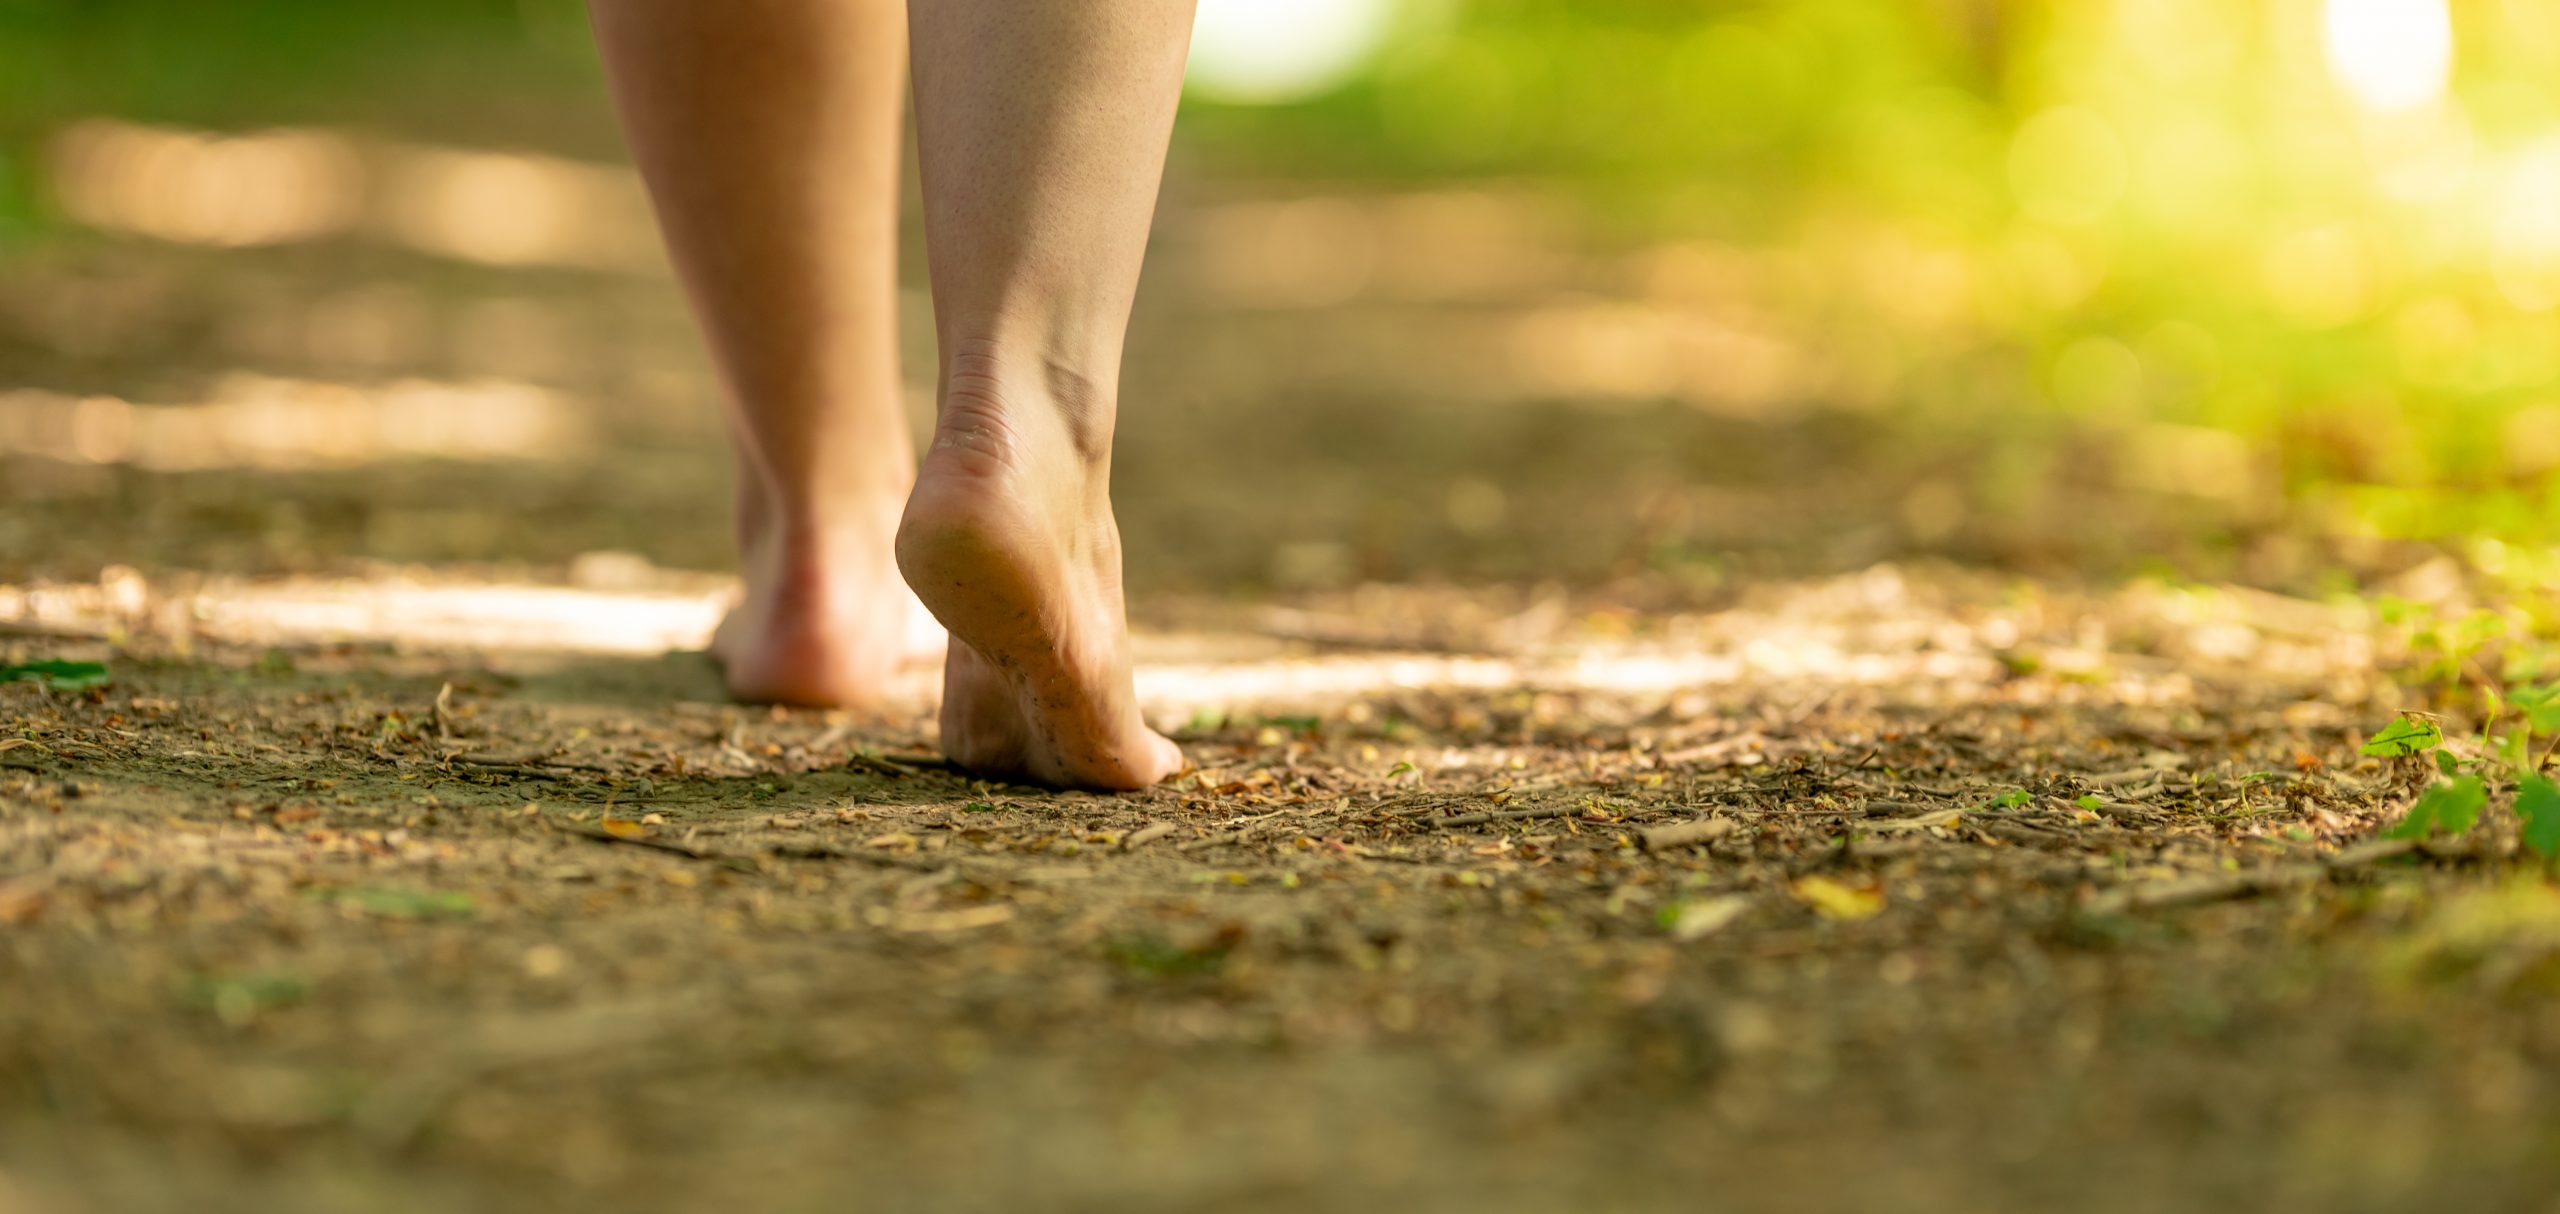 What are the health benefits of walking barefoot?